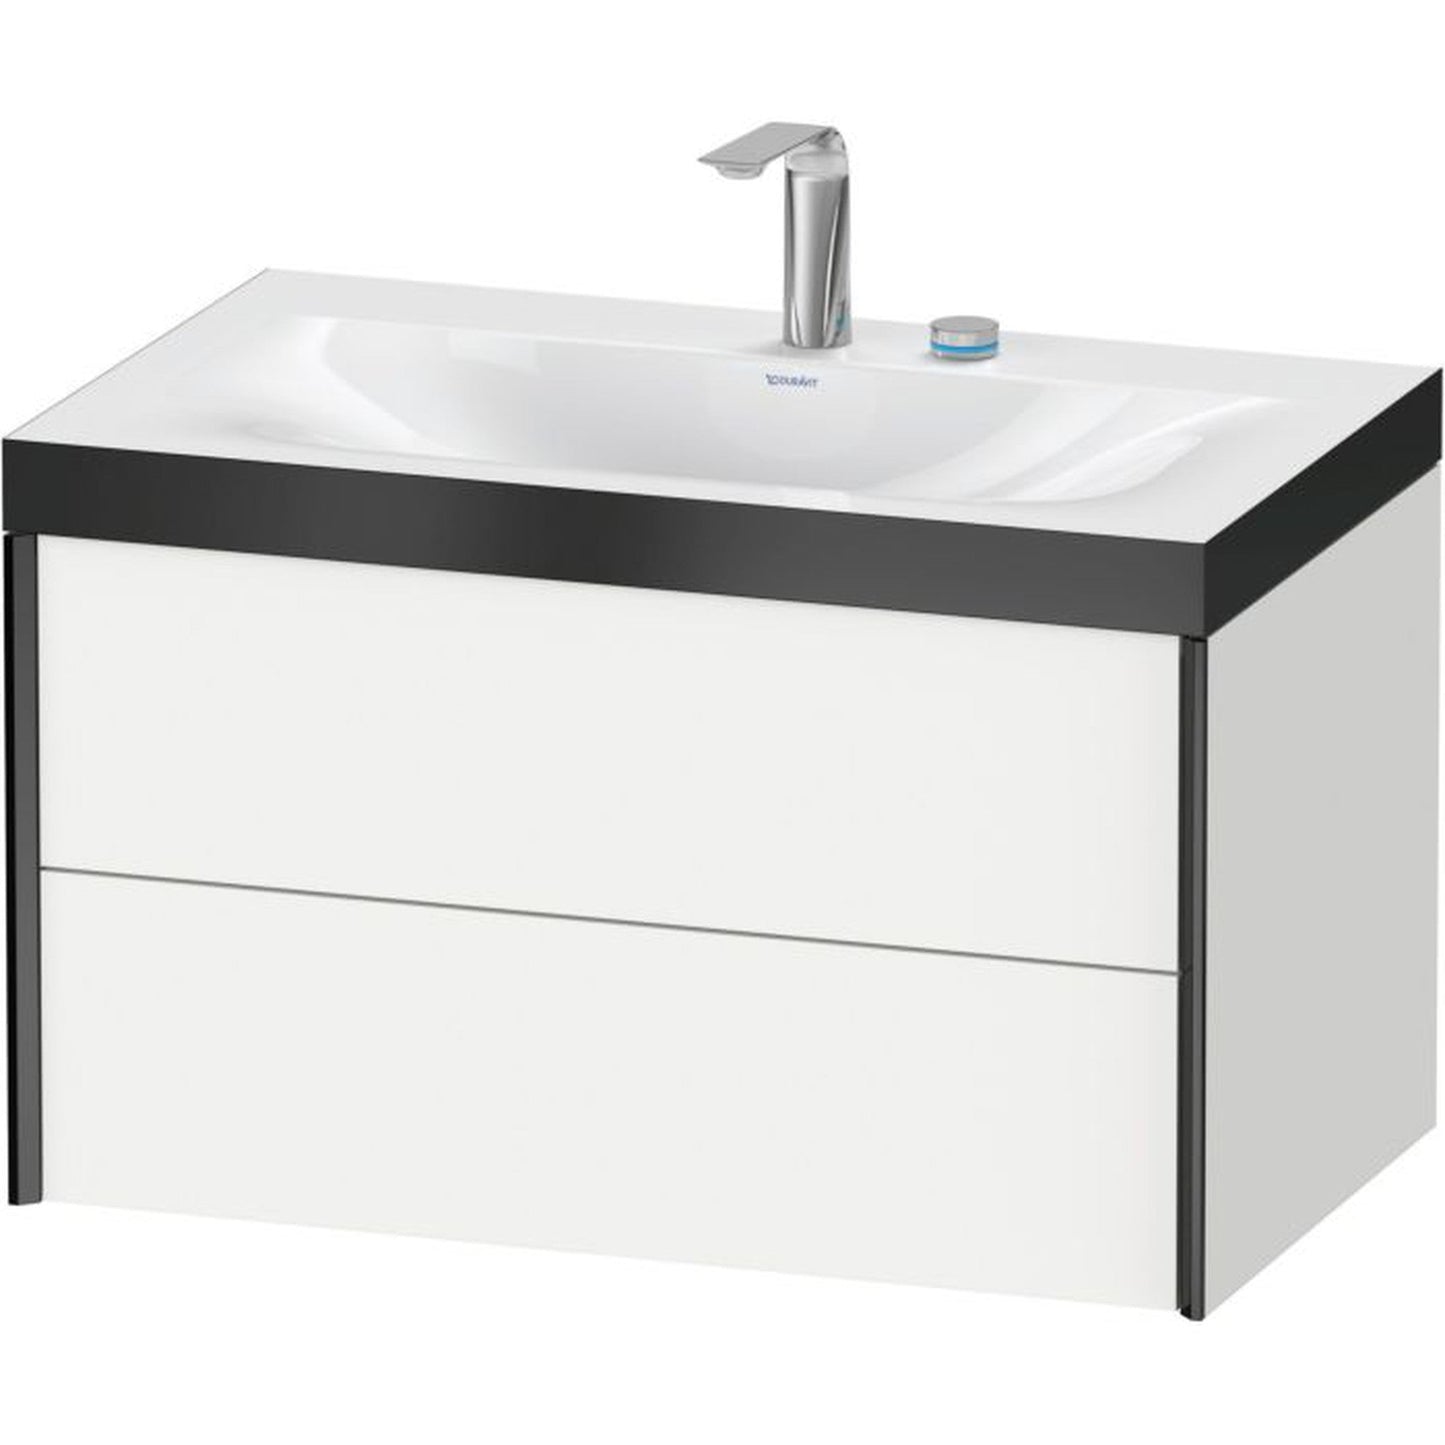 Duravit Xviu 31" x 20" x 19" Two Drawer C-Bonded Wall-Mount Vanity Kit With Two Tap Holes, White (XV4615EB218P)